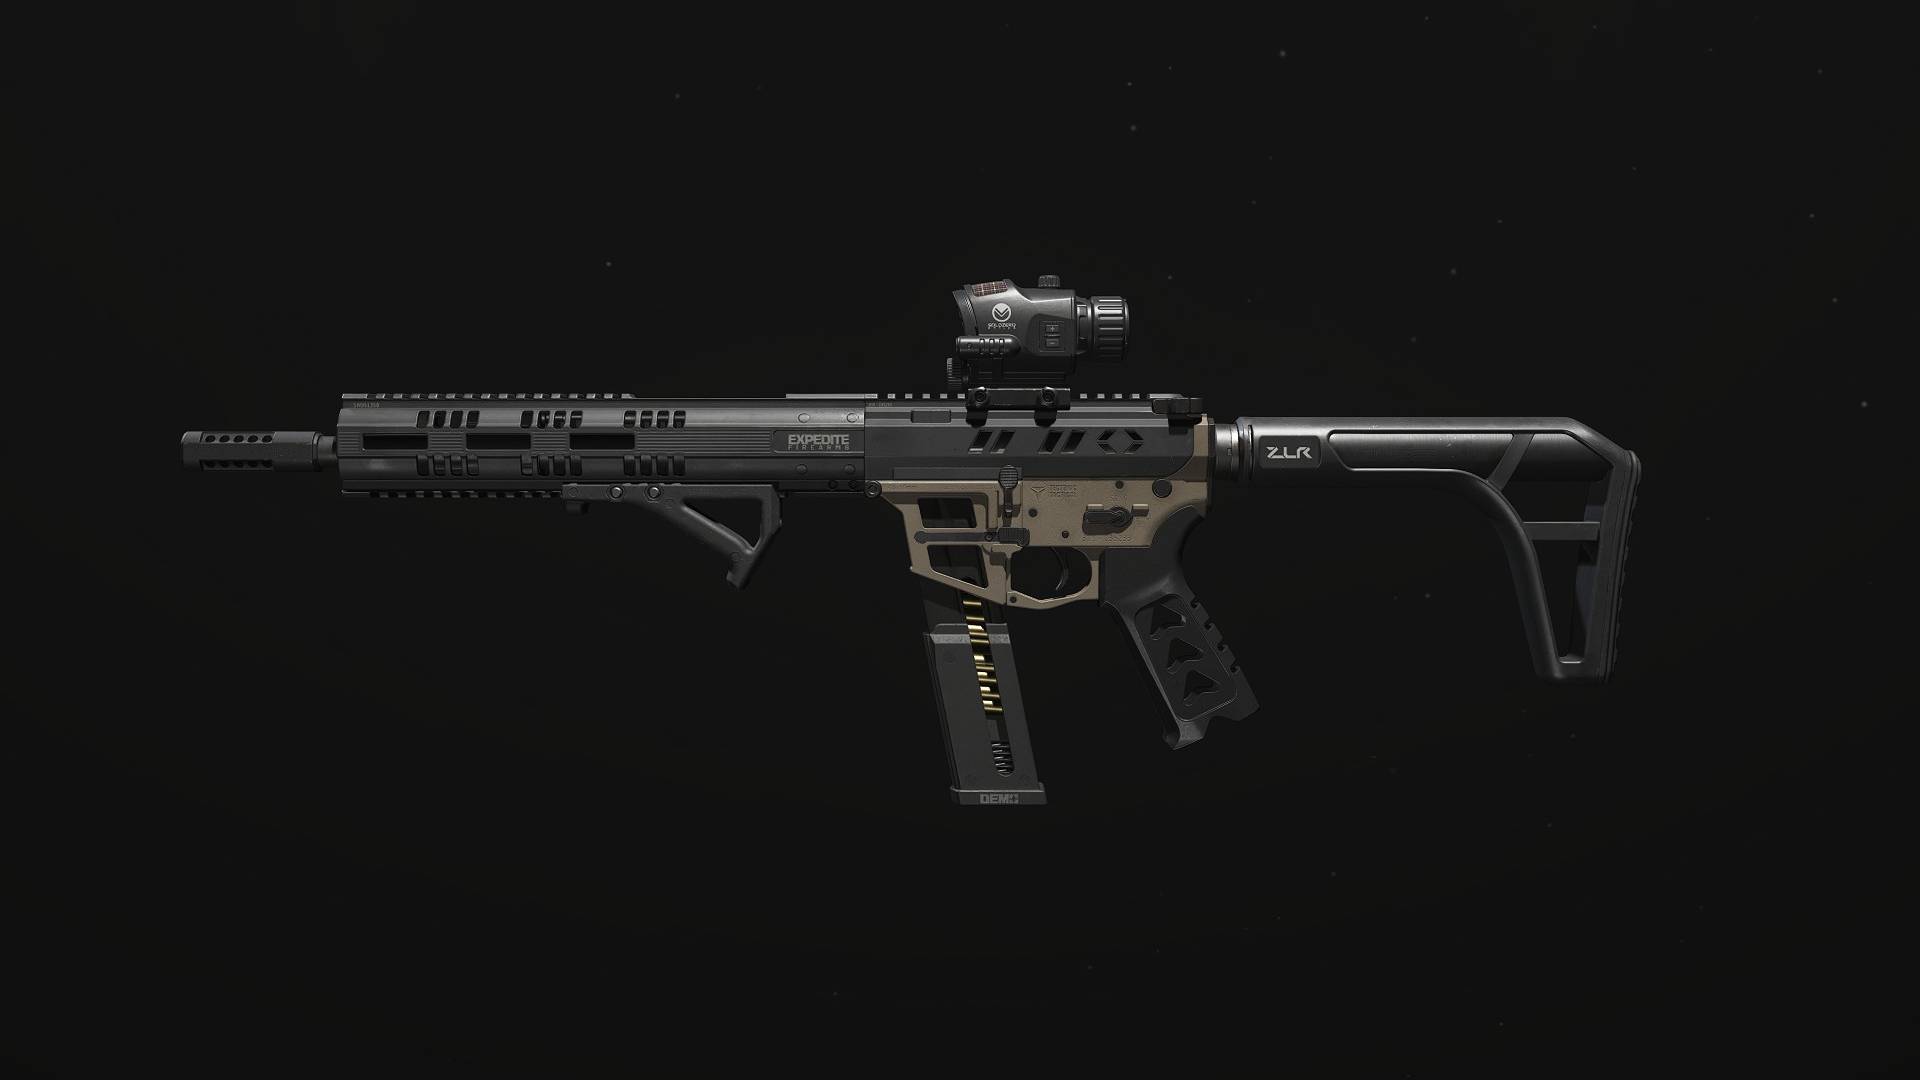 The Superi 46 floats over a black background in MW3.